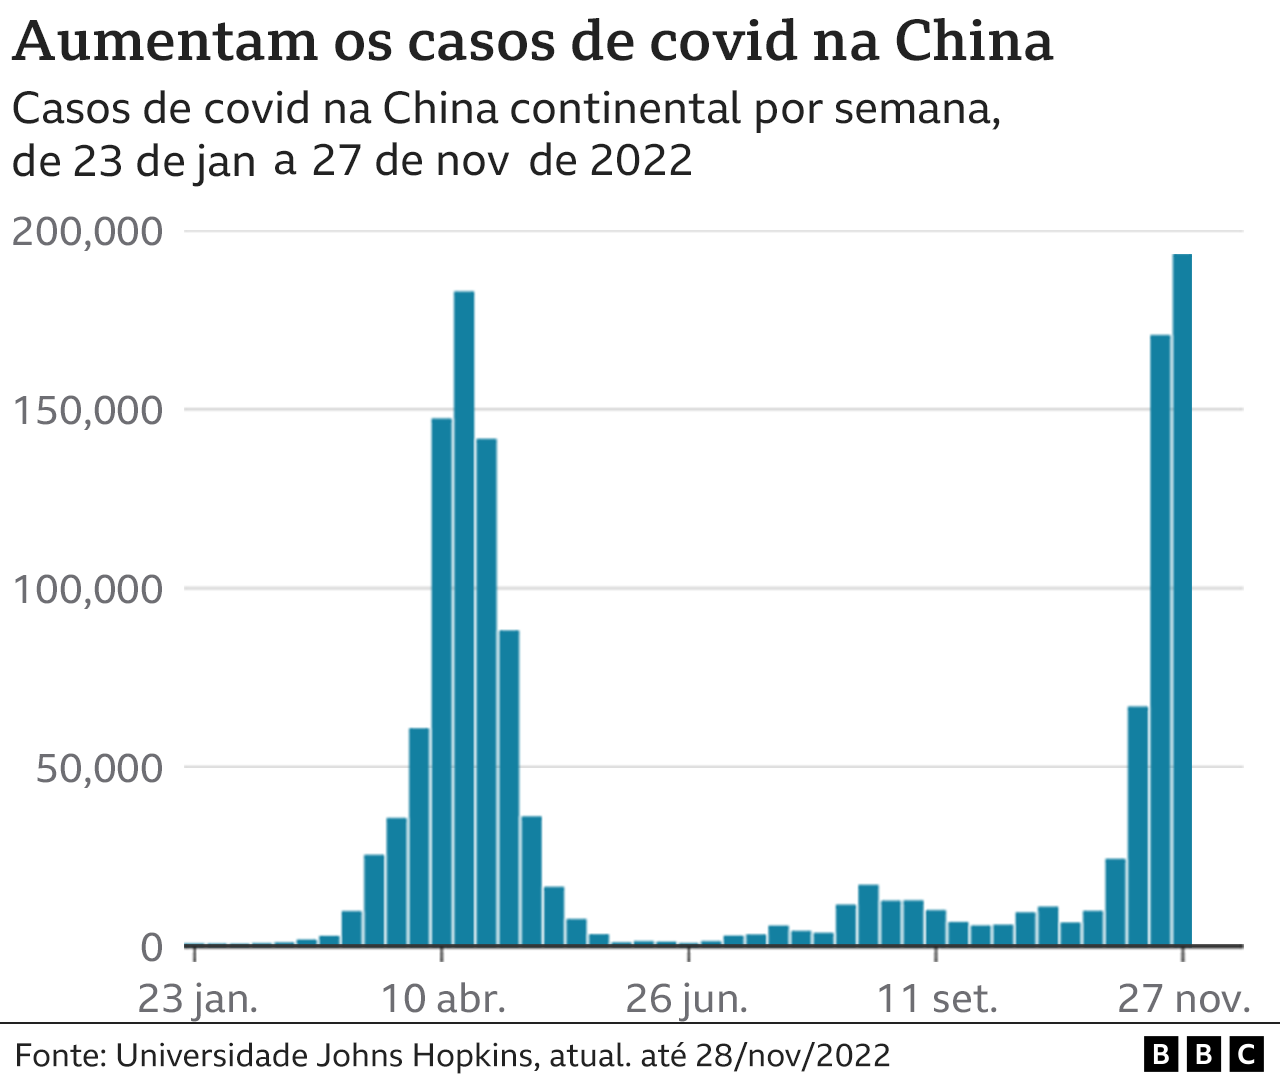 chart showing number of cases in China